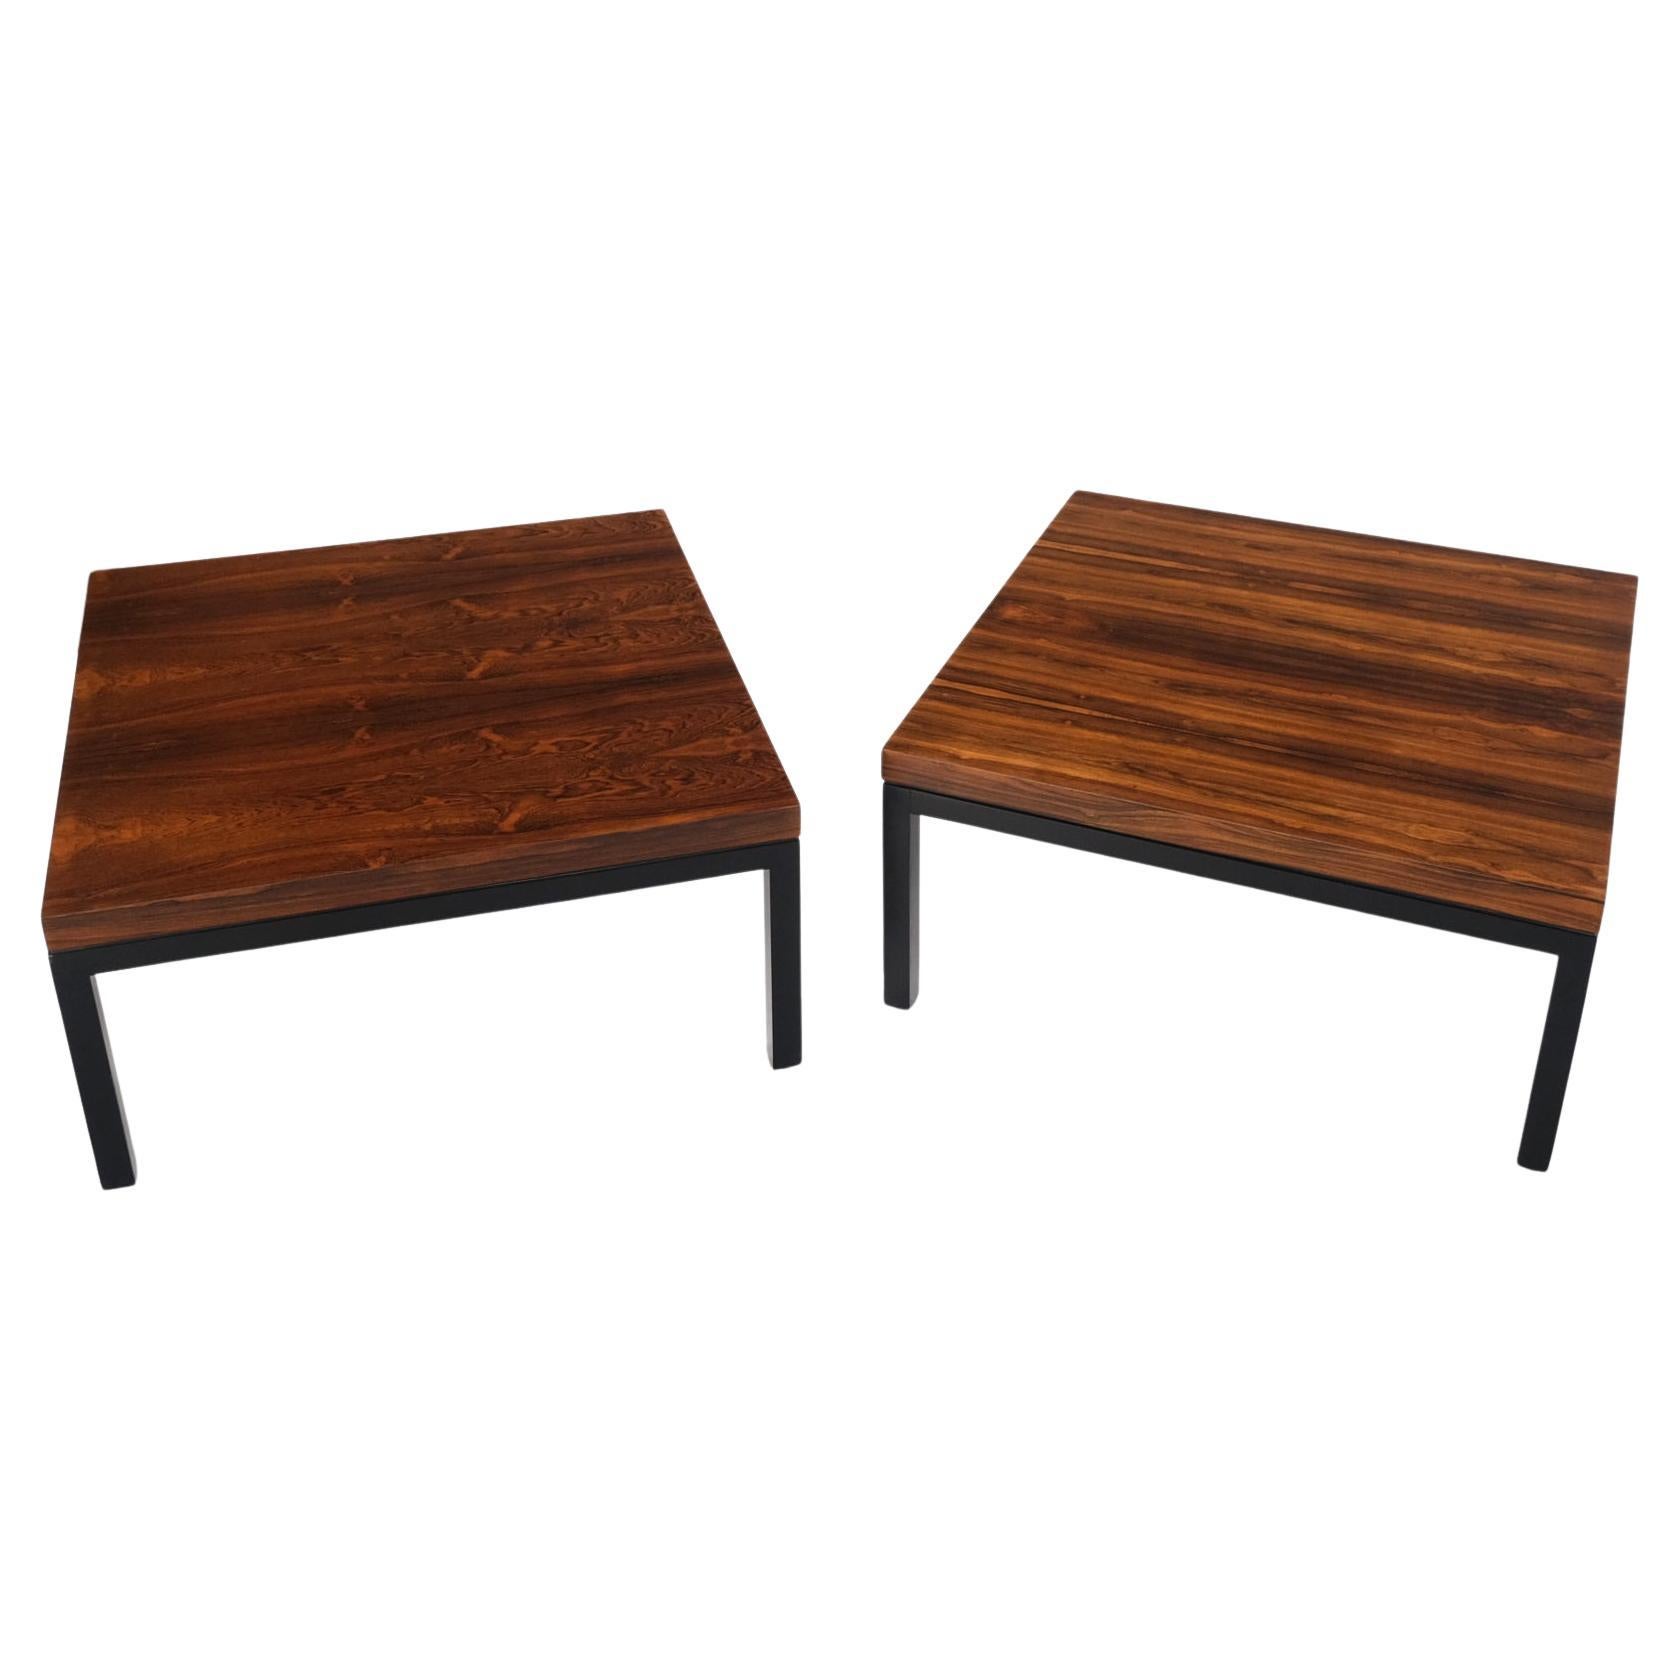 Pair of Large square rosewood coffee side end tables black bases MINT Baughman.